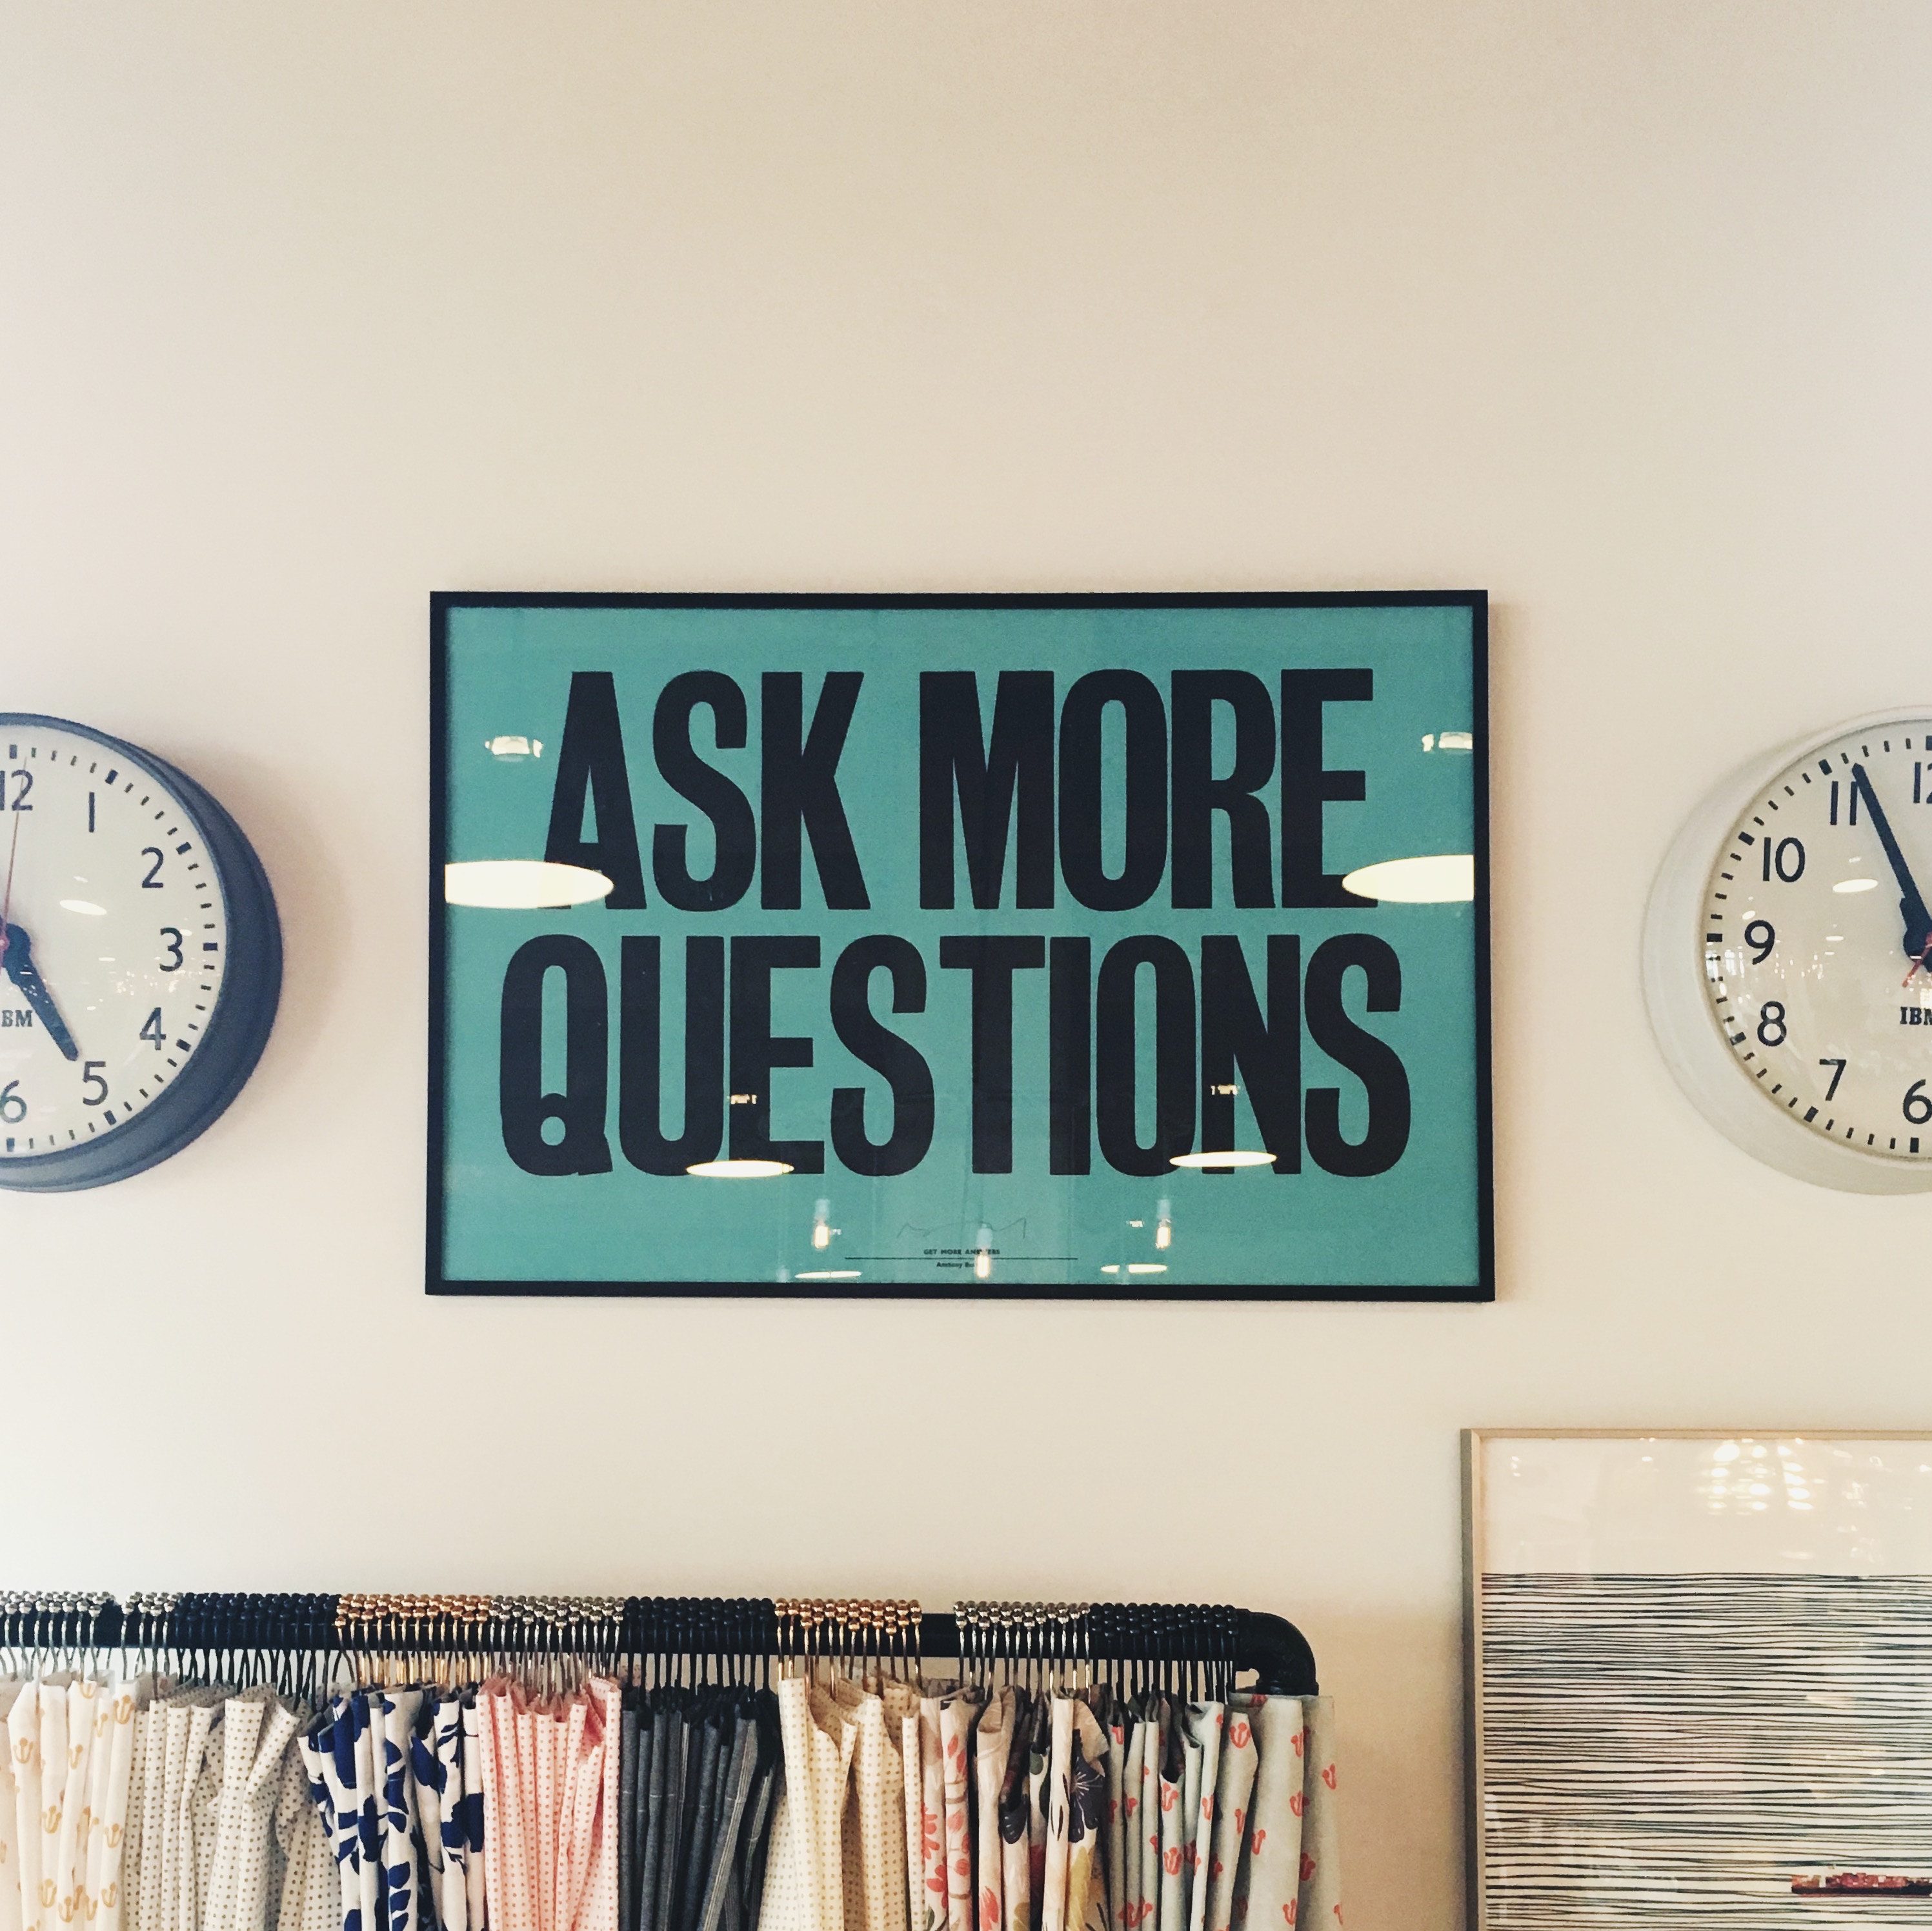 Questions To Ask Av Company - Ask More Questions - HD Wallpaper 